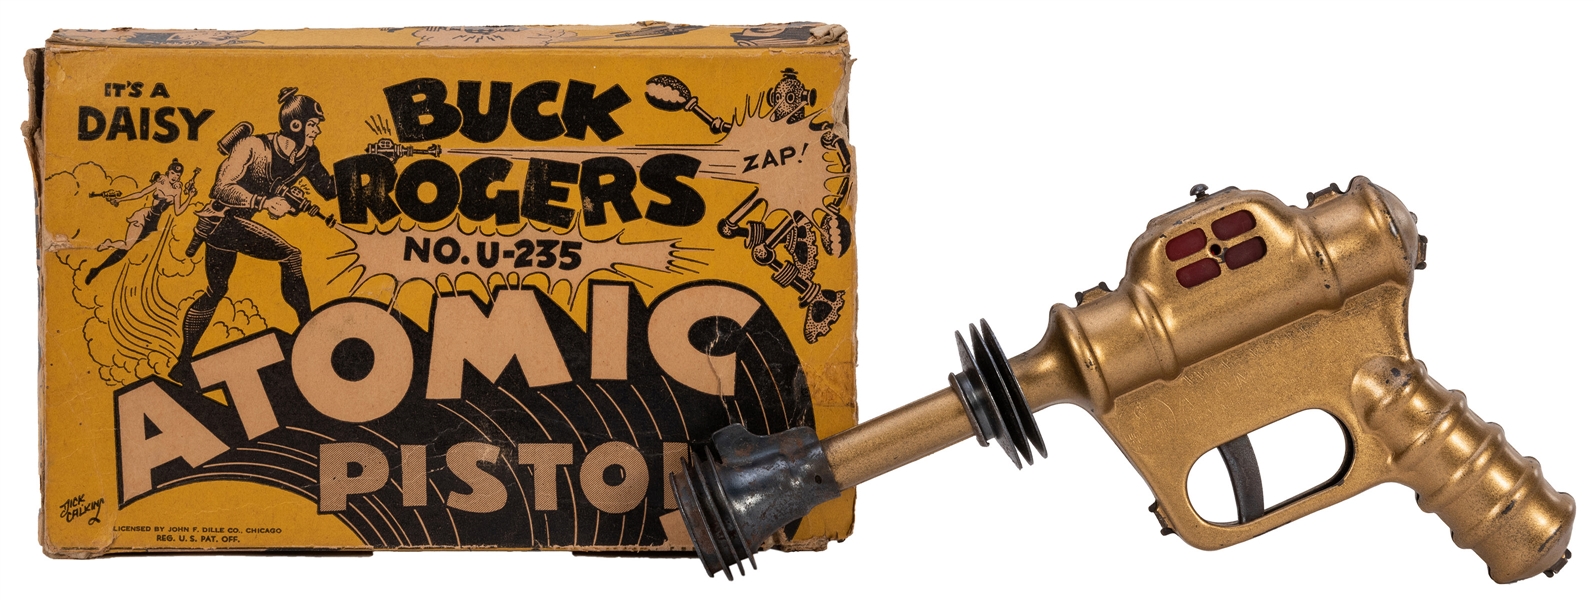  Buck Rogers Atomic Pistol in Original Box with Leather Hols...